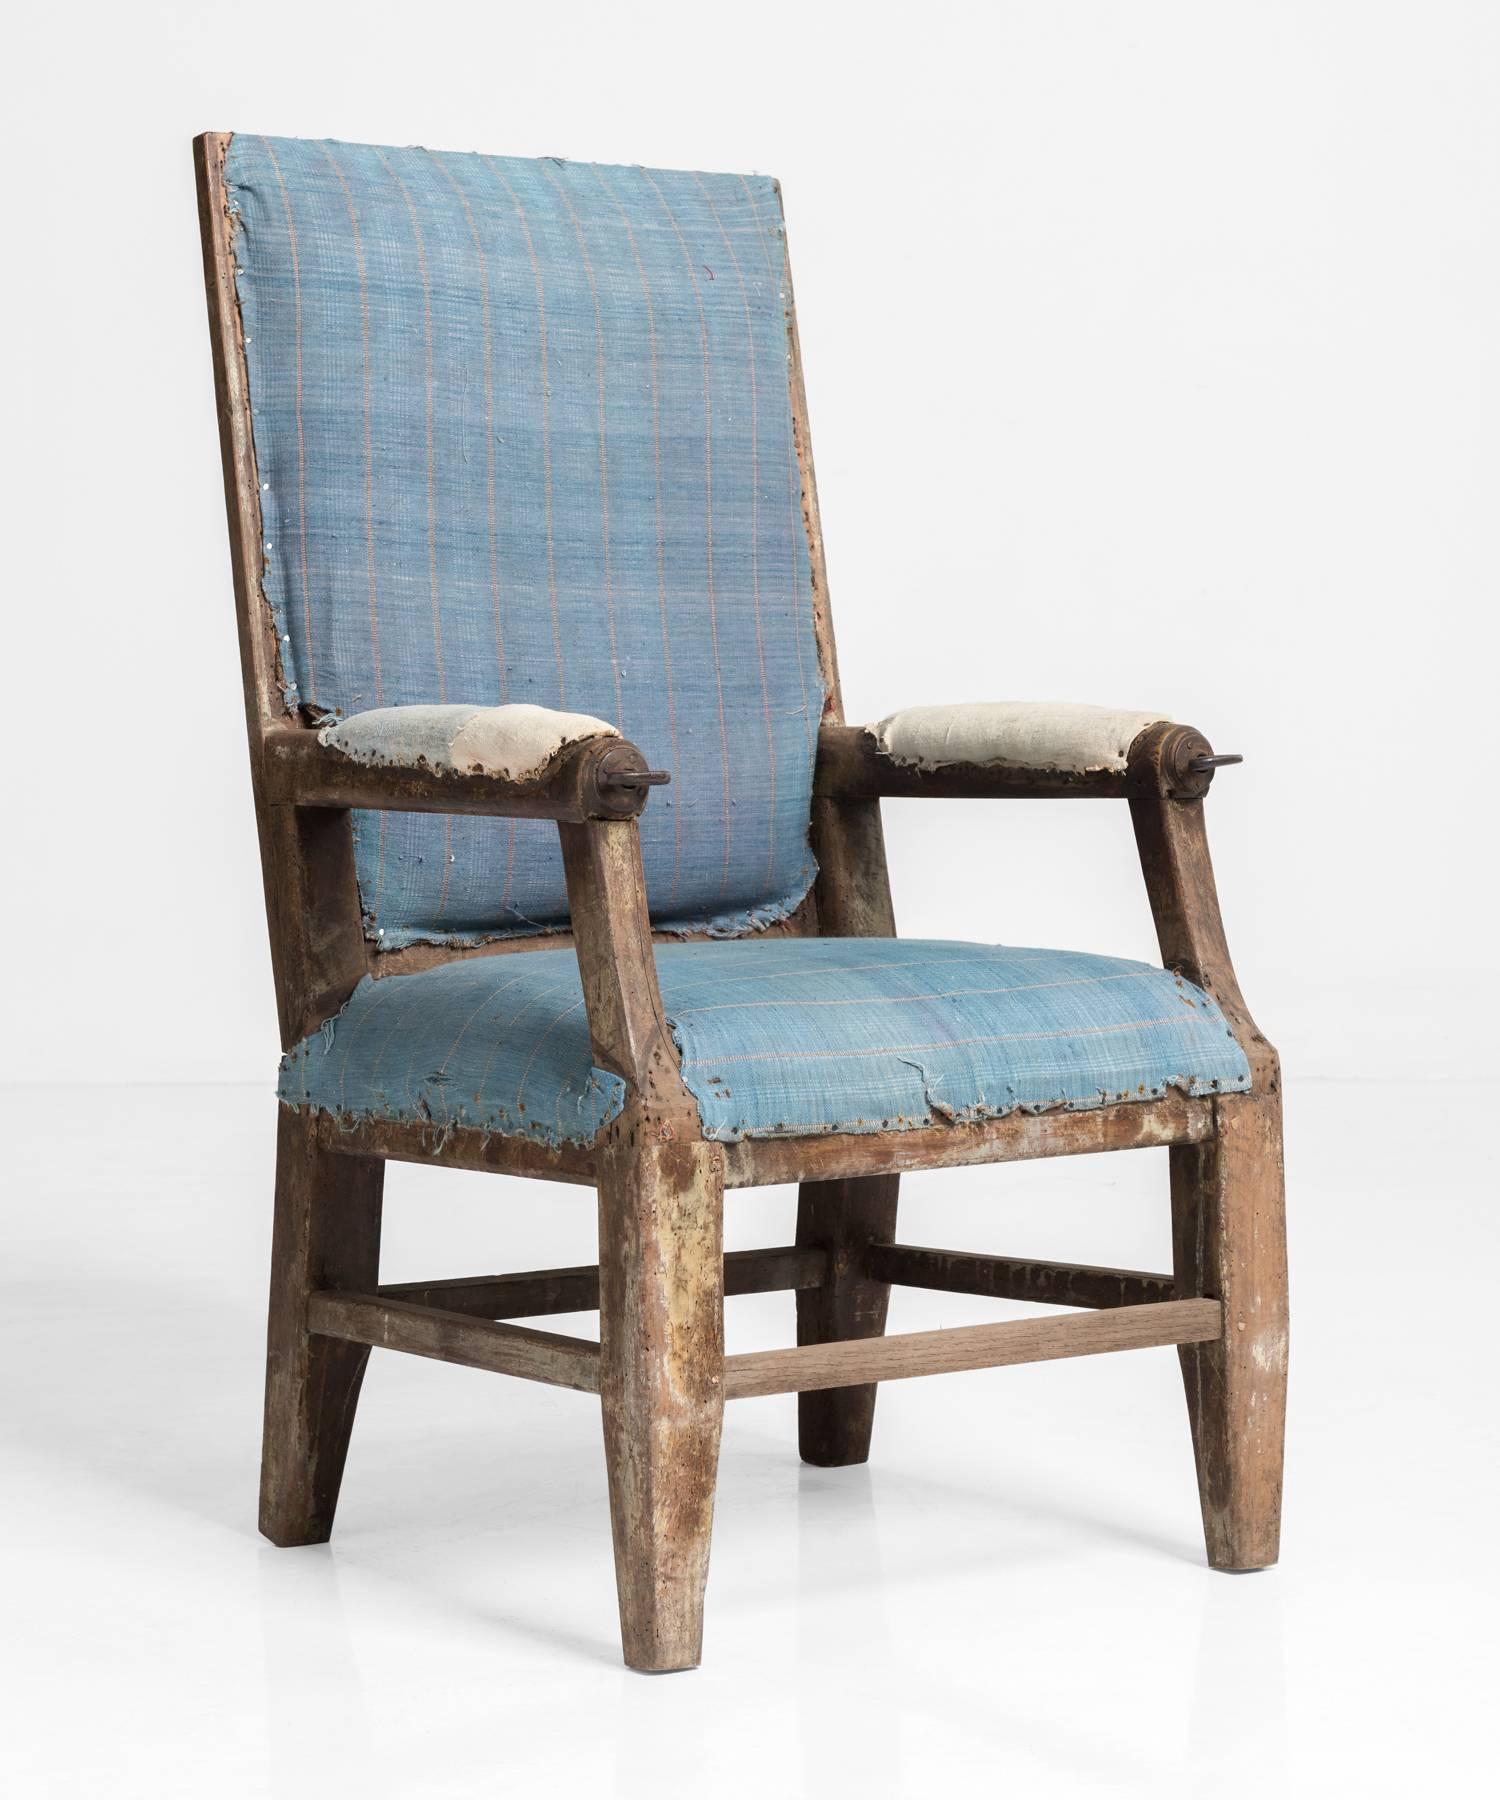 Primitive Recliner Armchair, France, circa 1770

Amazing patina and original upholstery. Adjustable iron rods run through arms to control a reclining back.